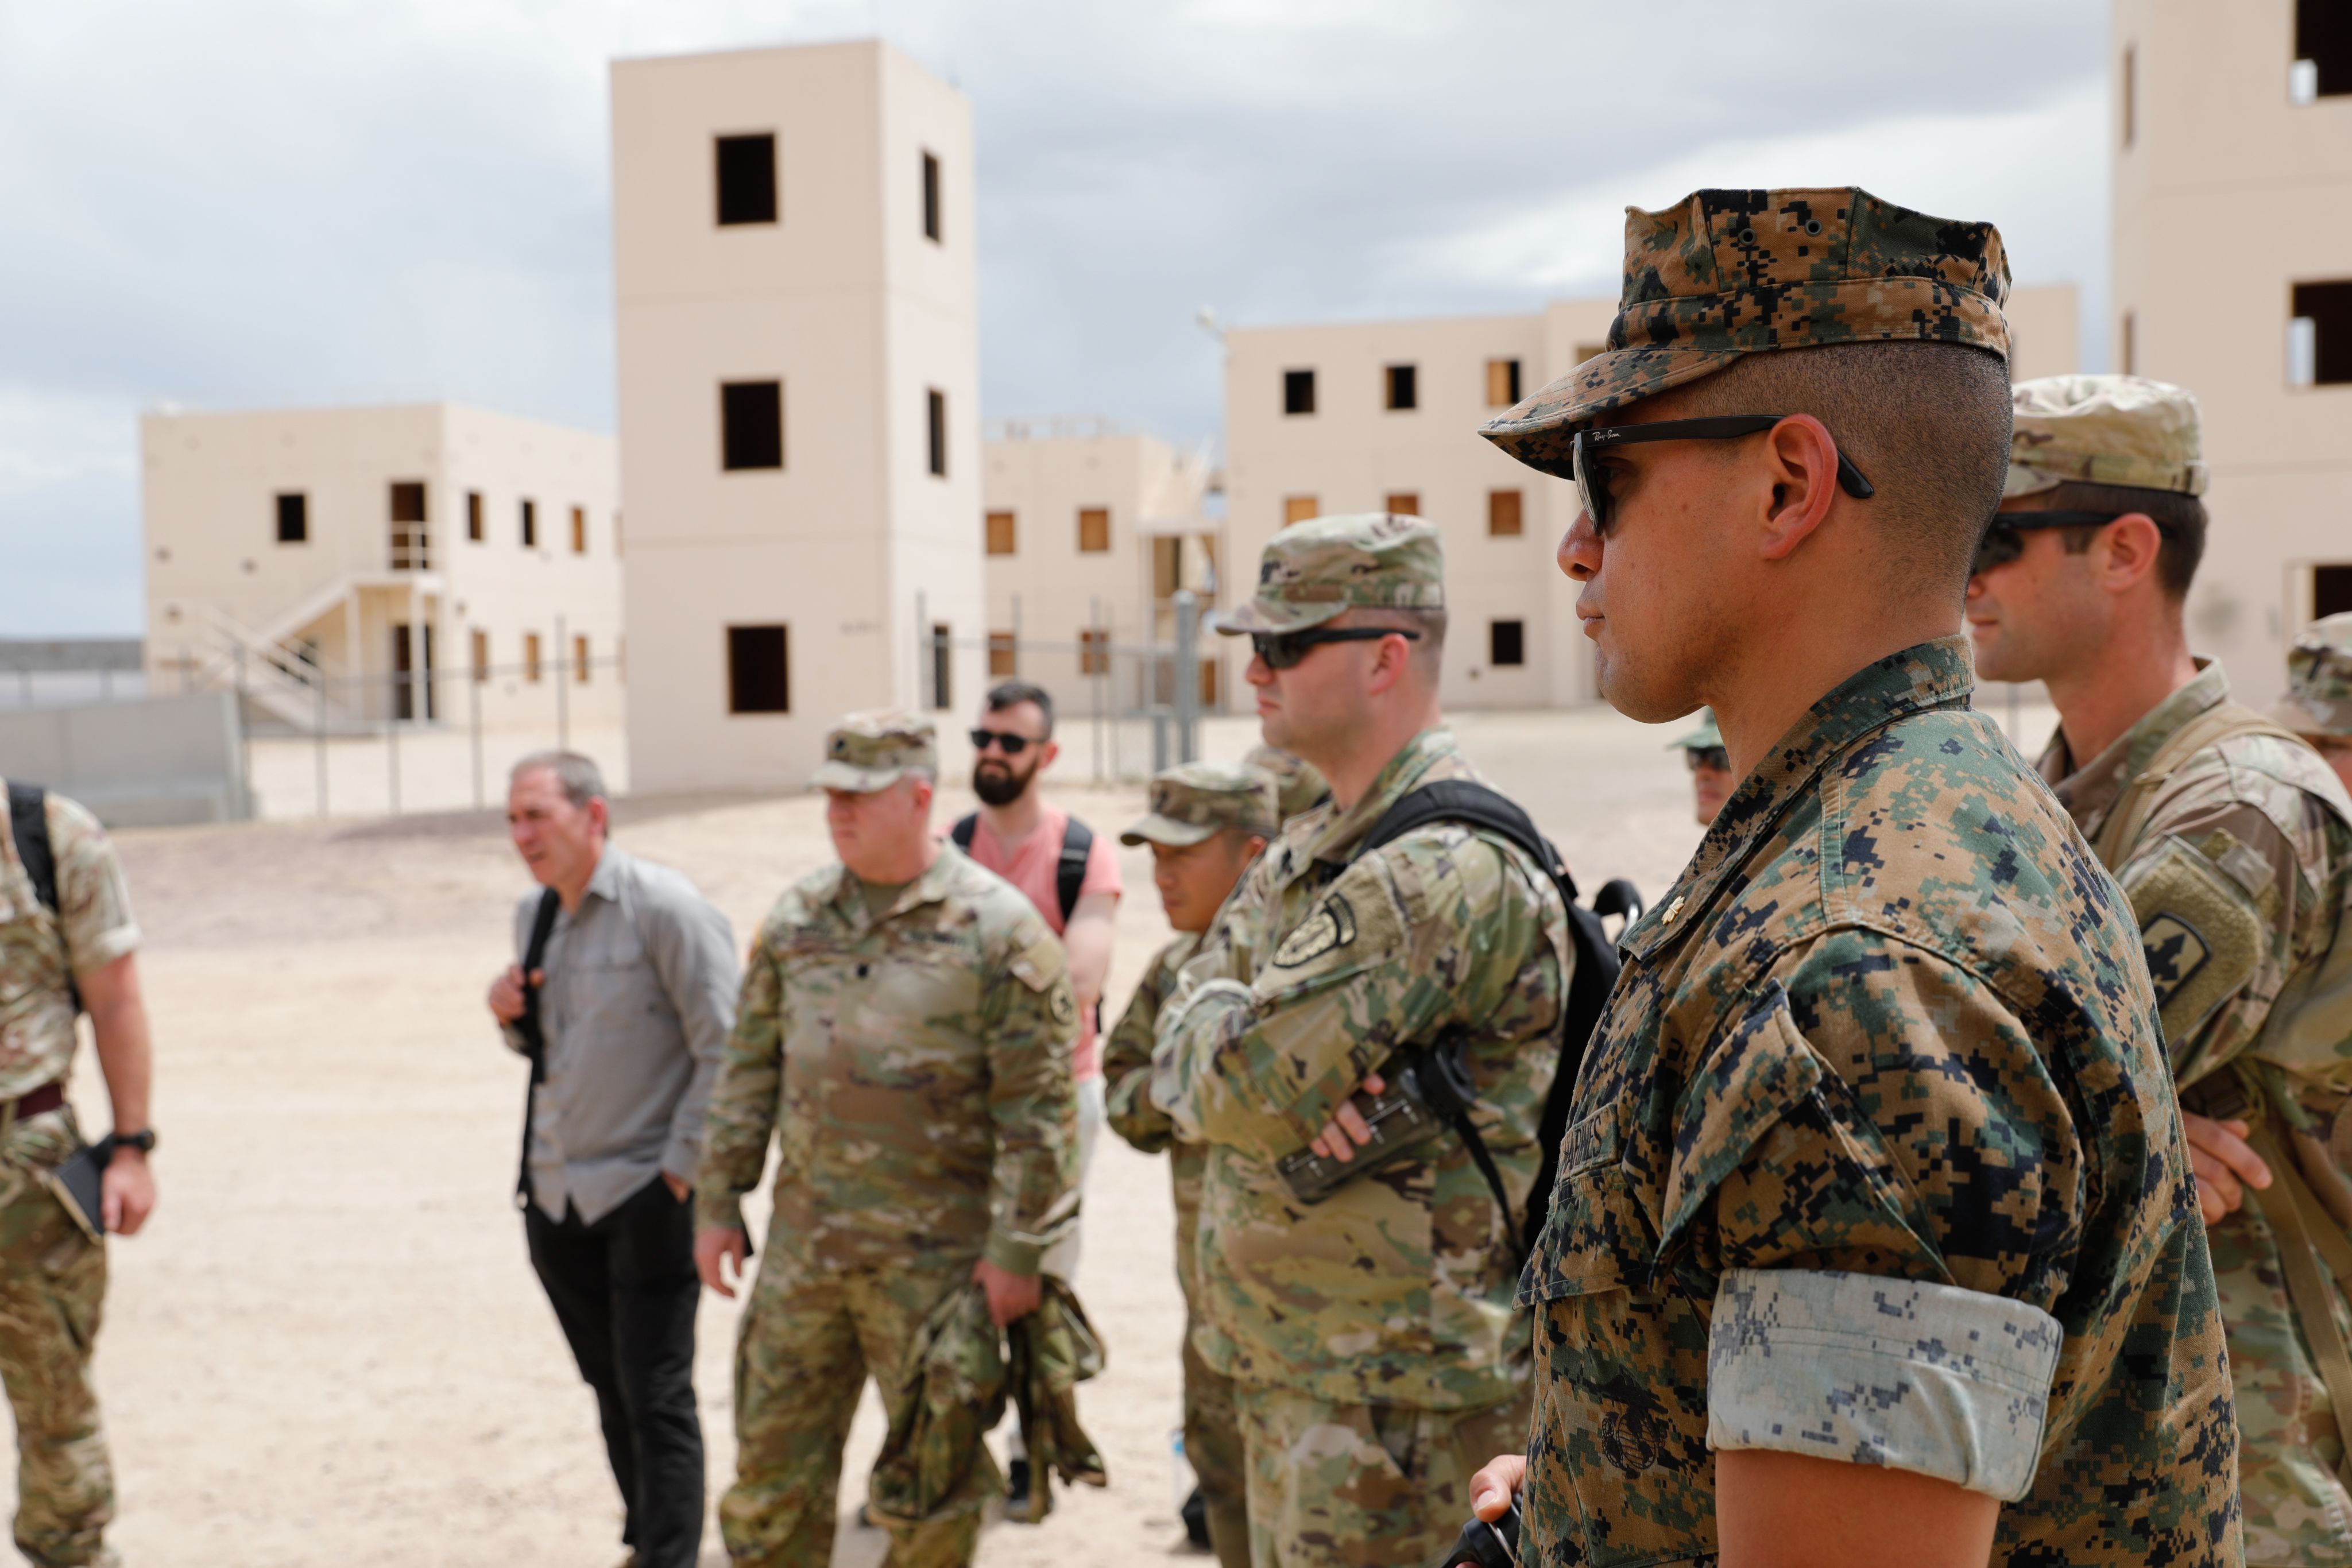 Marine, Soldiers and civilians look at container buildings.